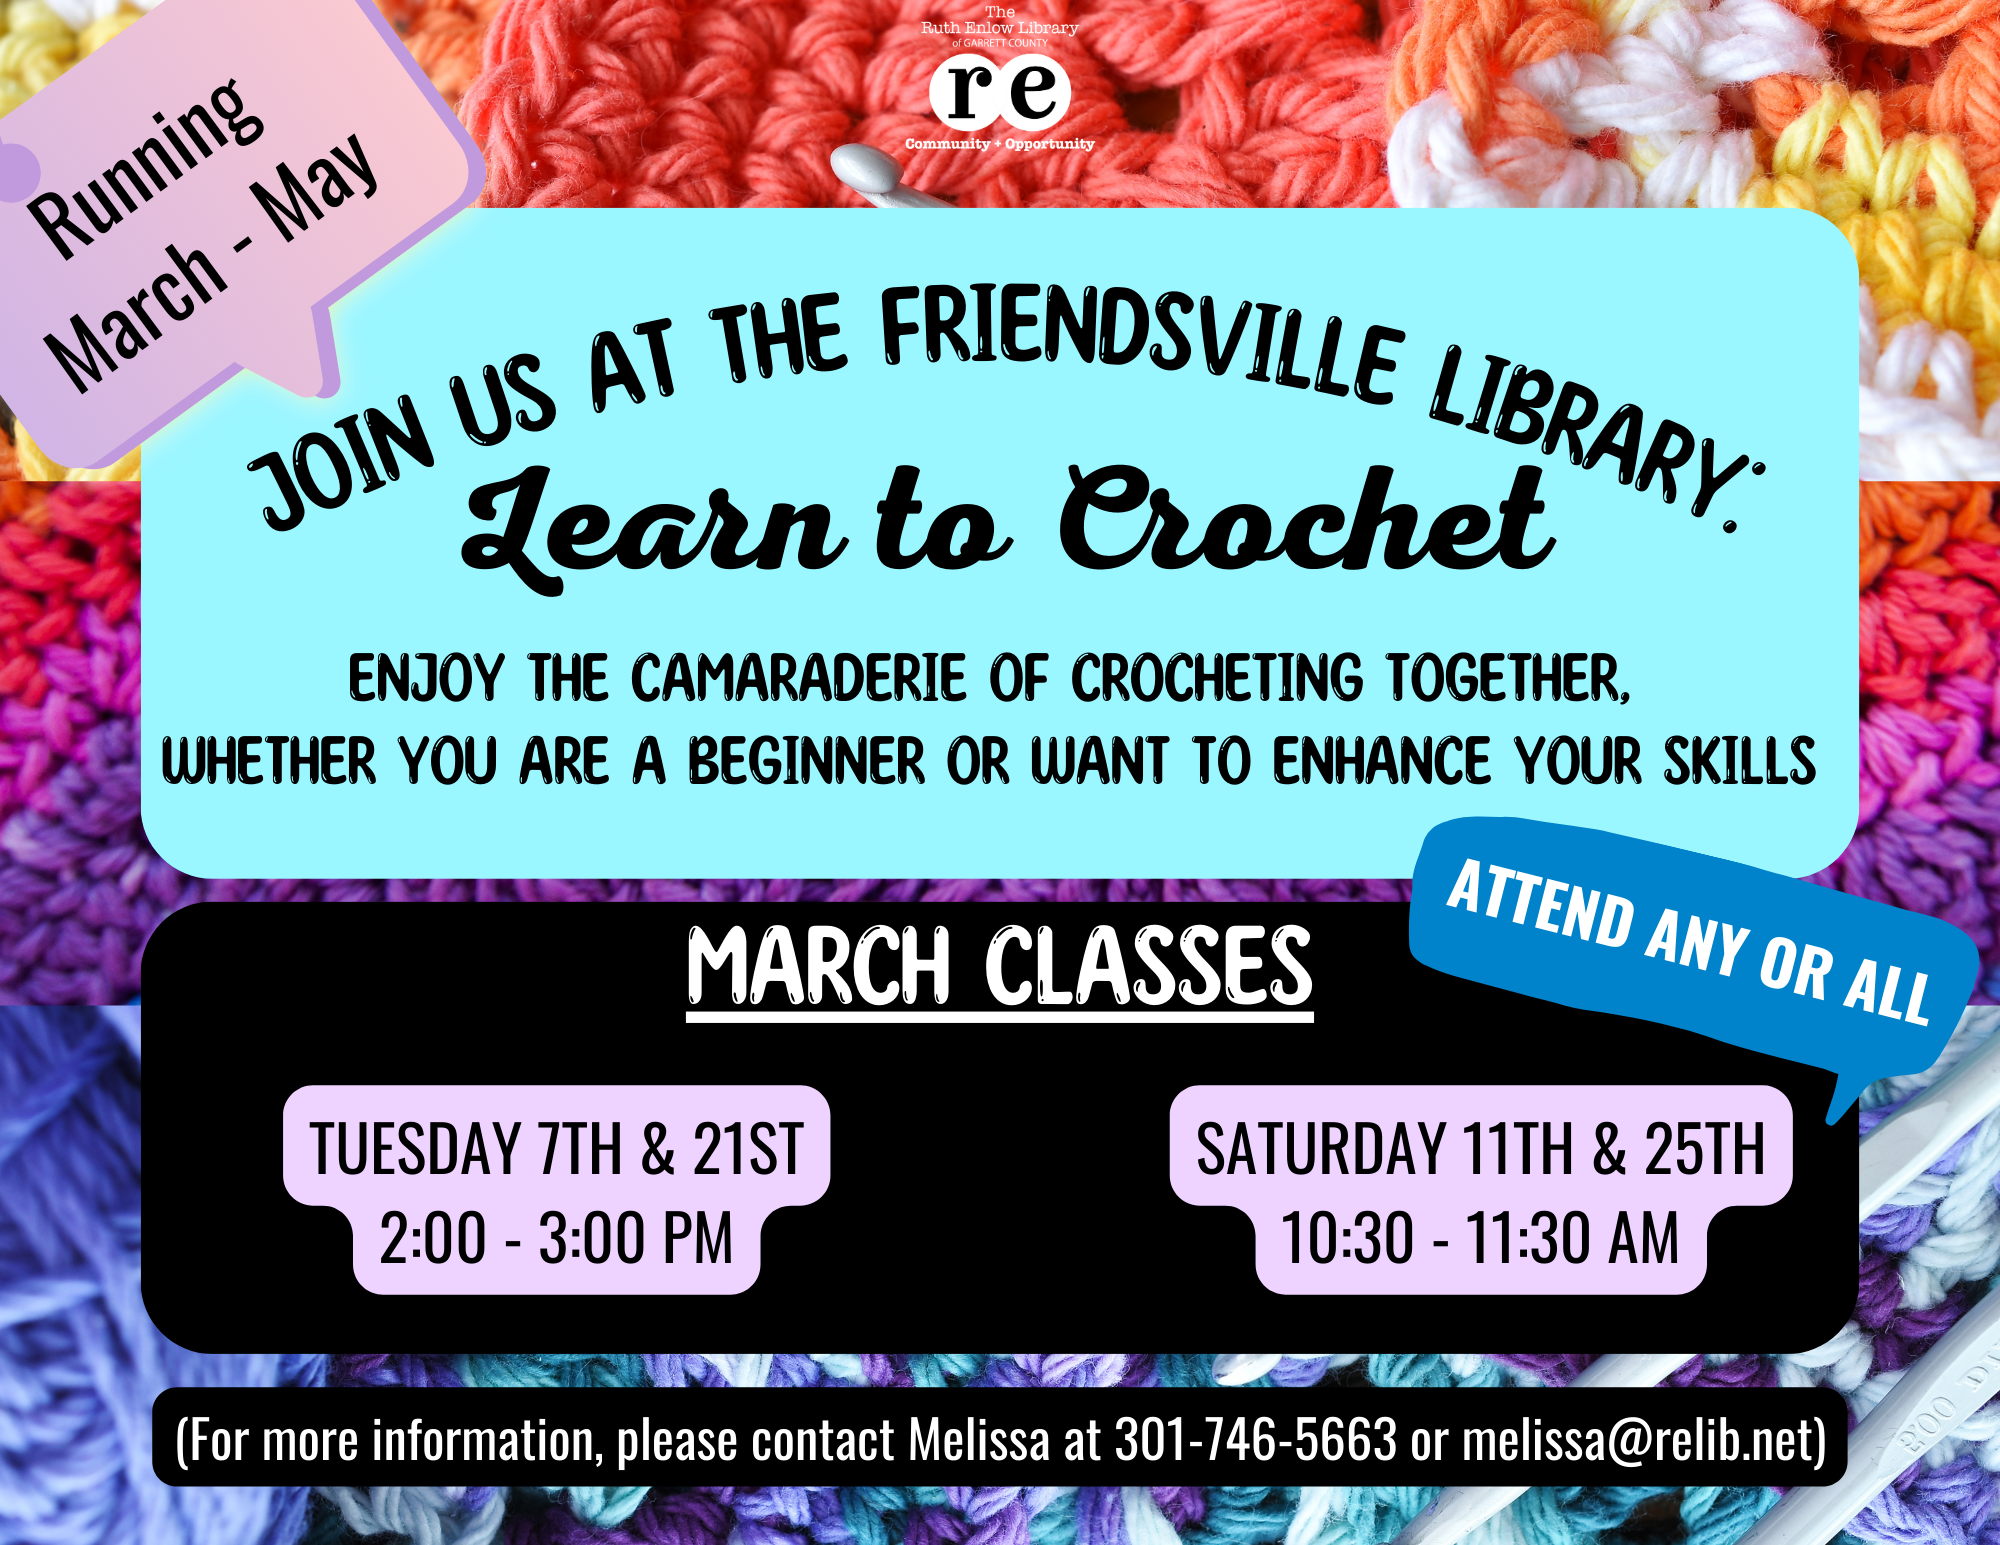 Flyer displaying crochet materials and infomation about crocheting classes